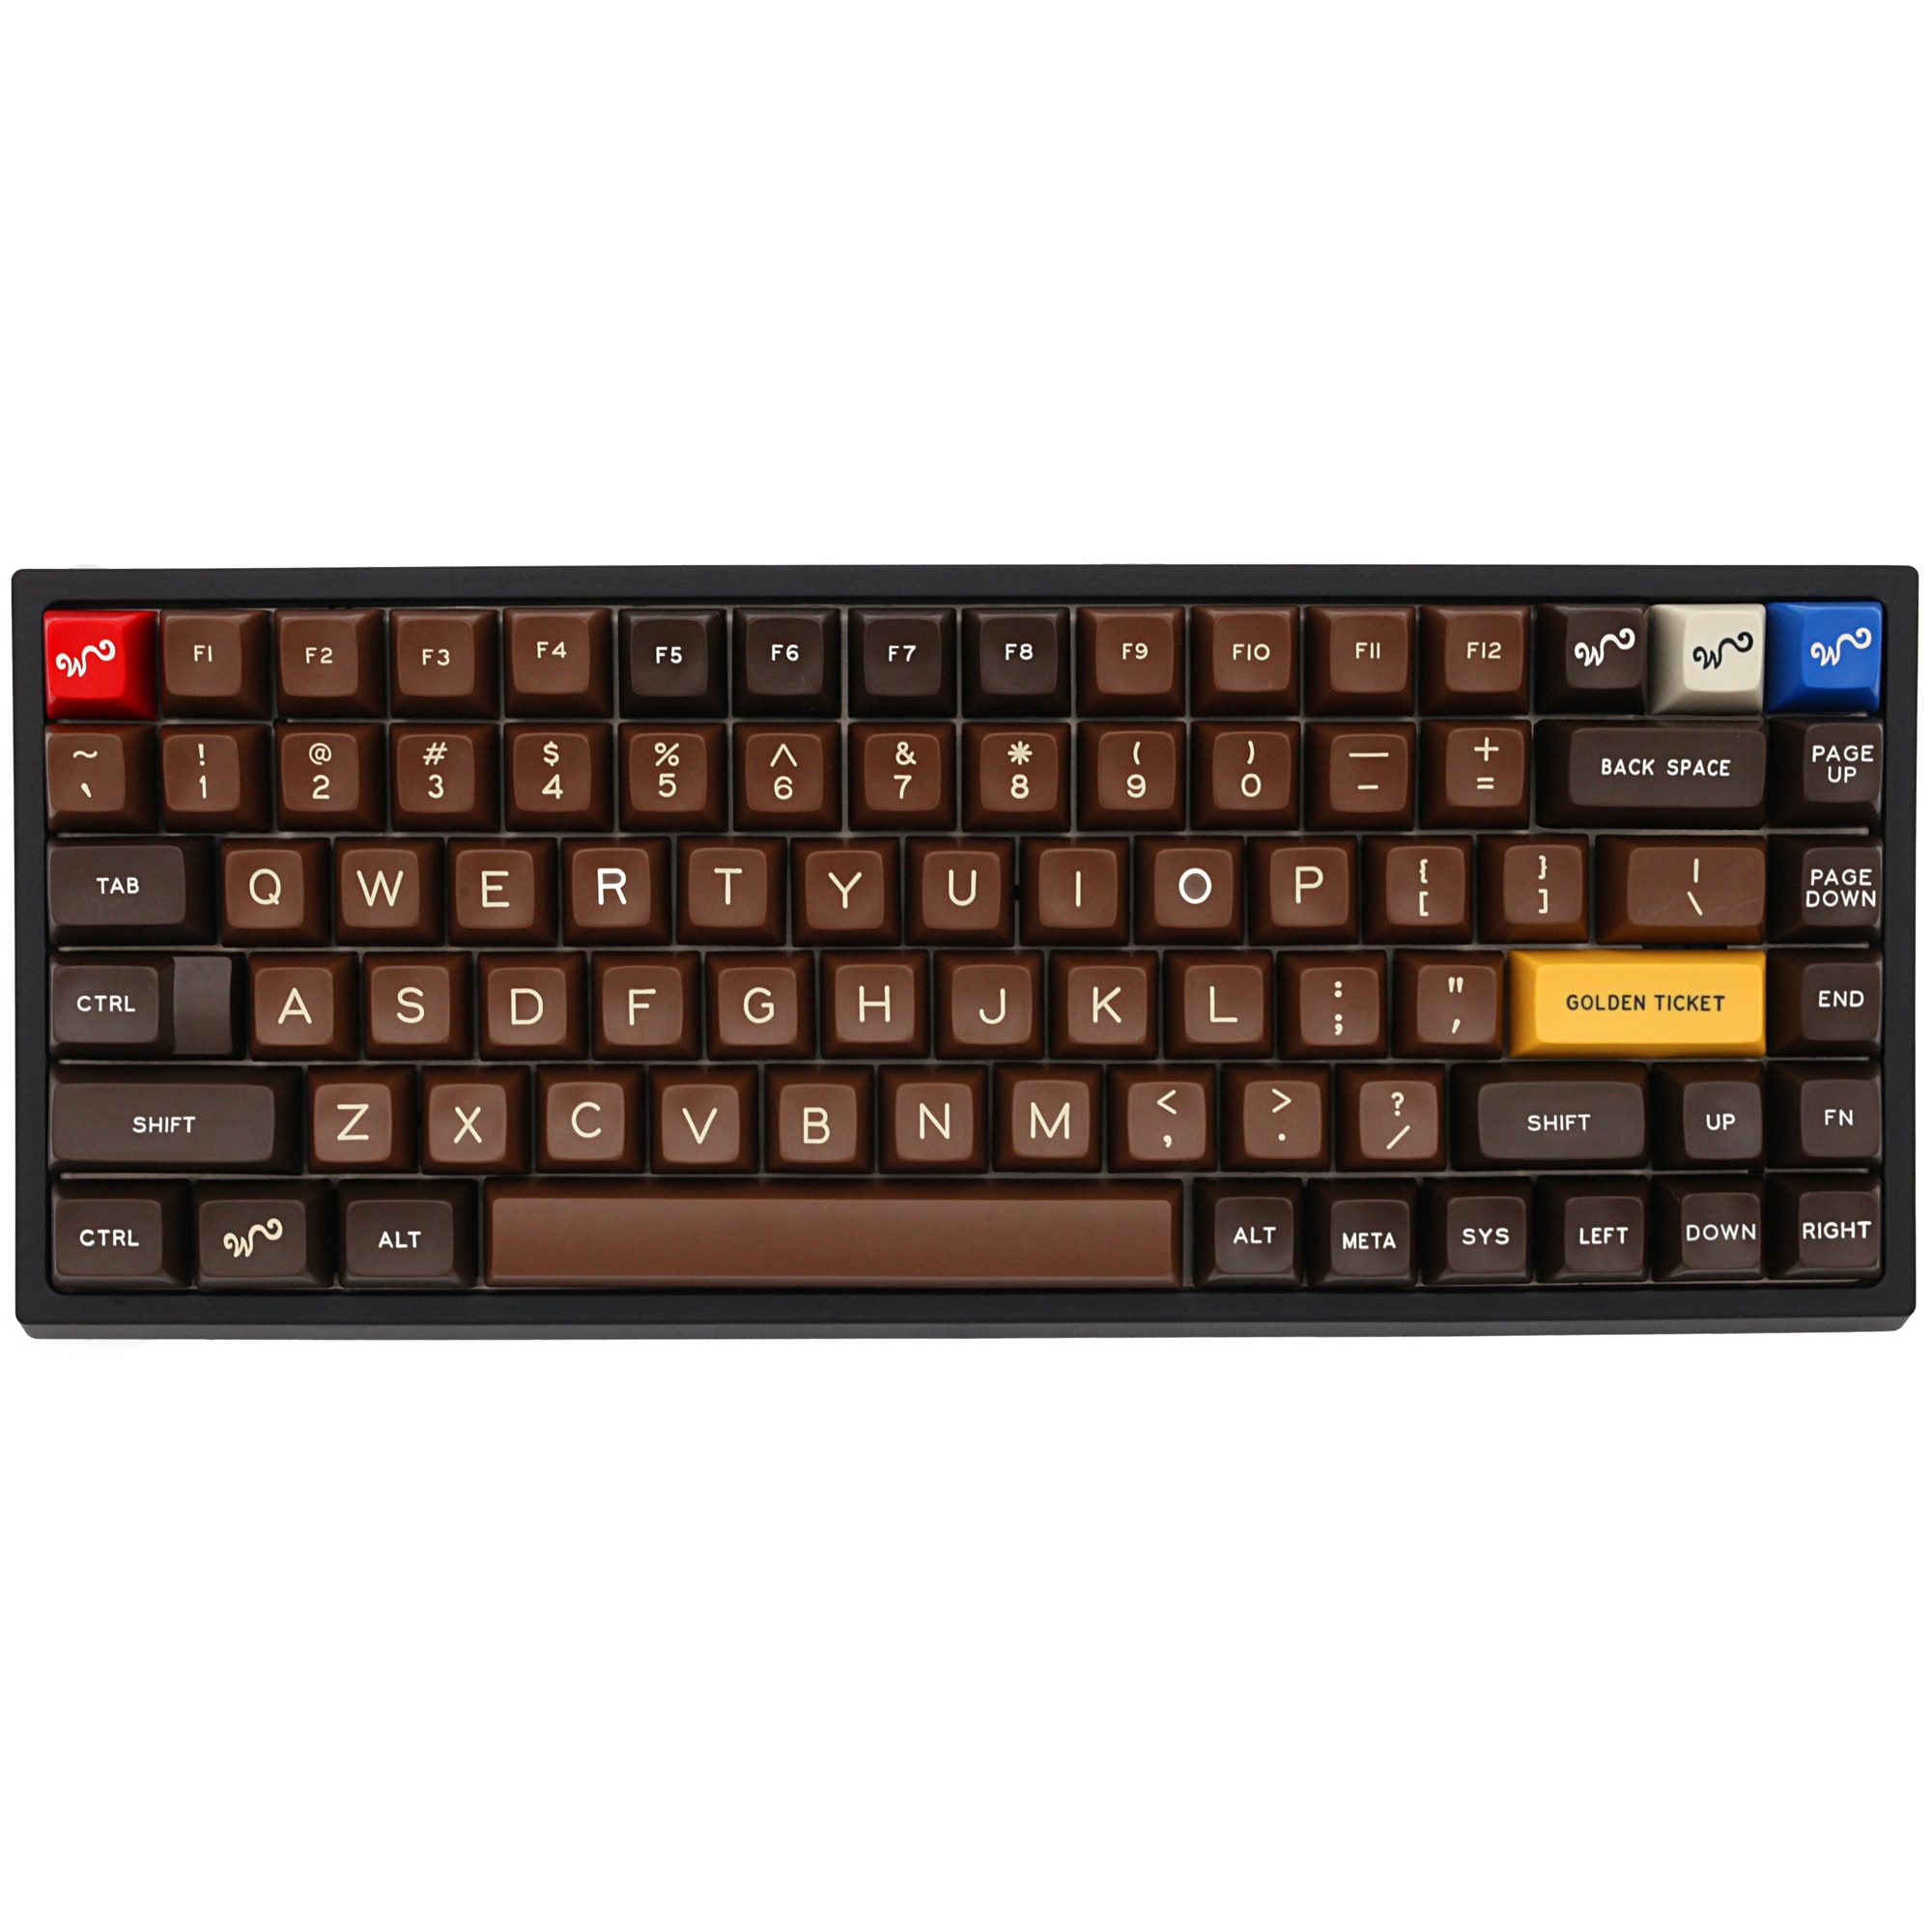 xd84pro XD84 pro Custom Mechanical Keyboard Kit 75% Supports TKG-TOOLS Support Underglow RGB PCB programmed gh84 kle type c